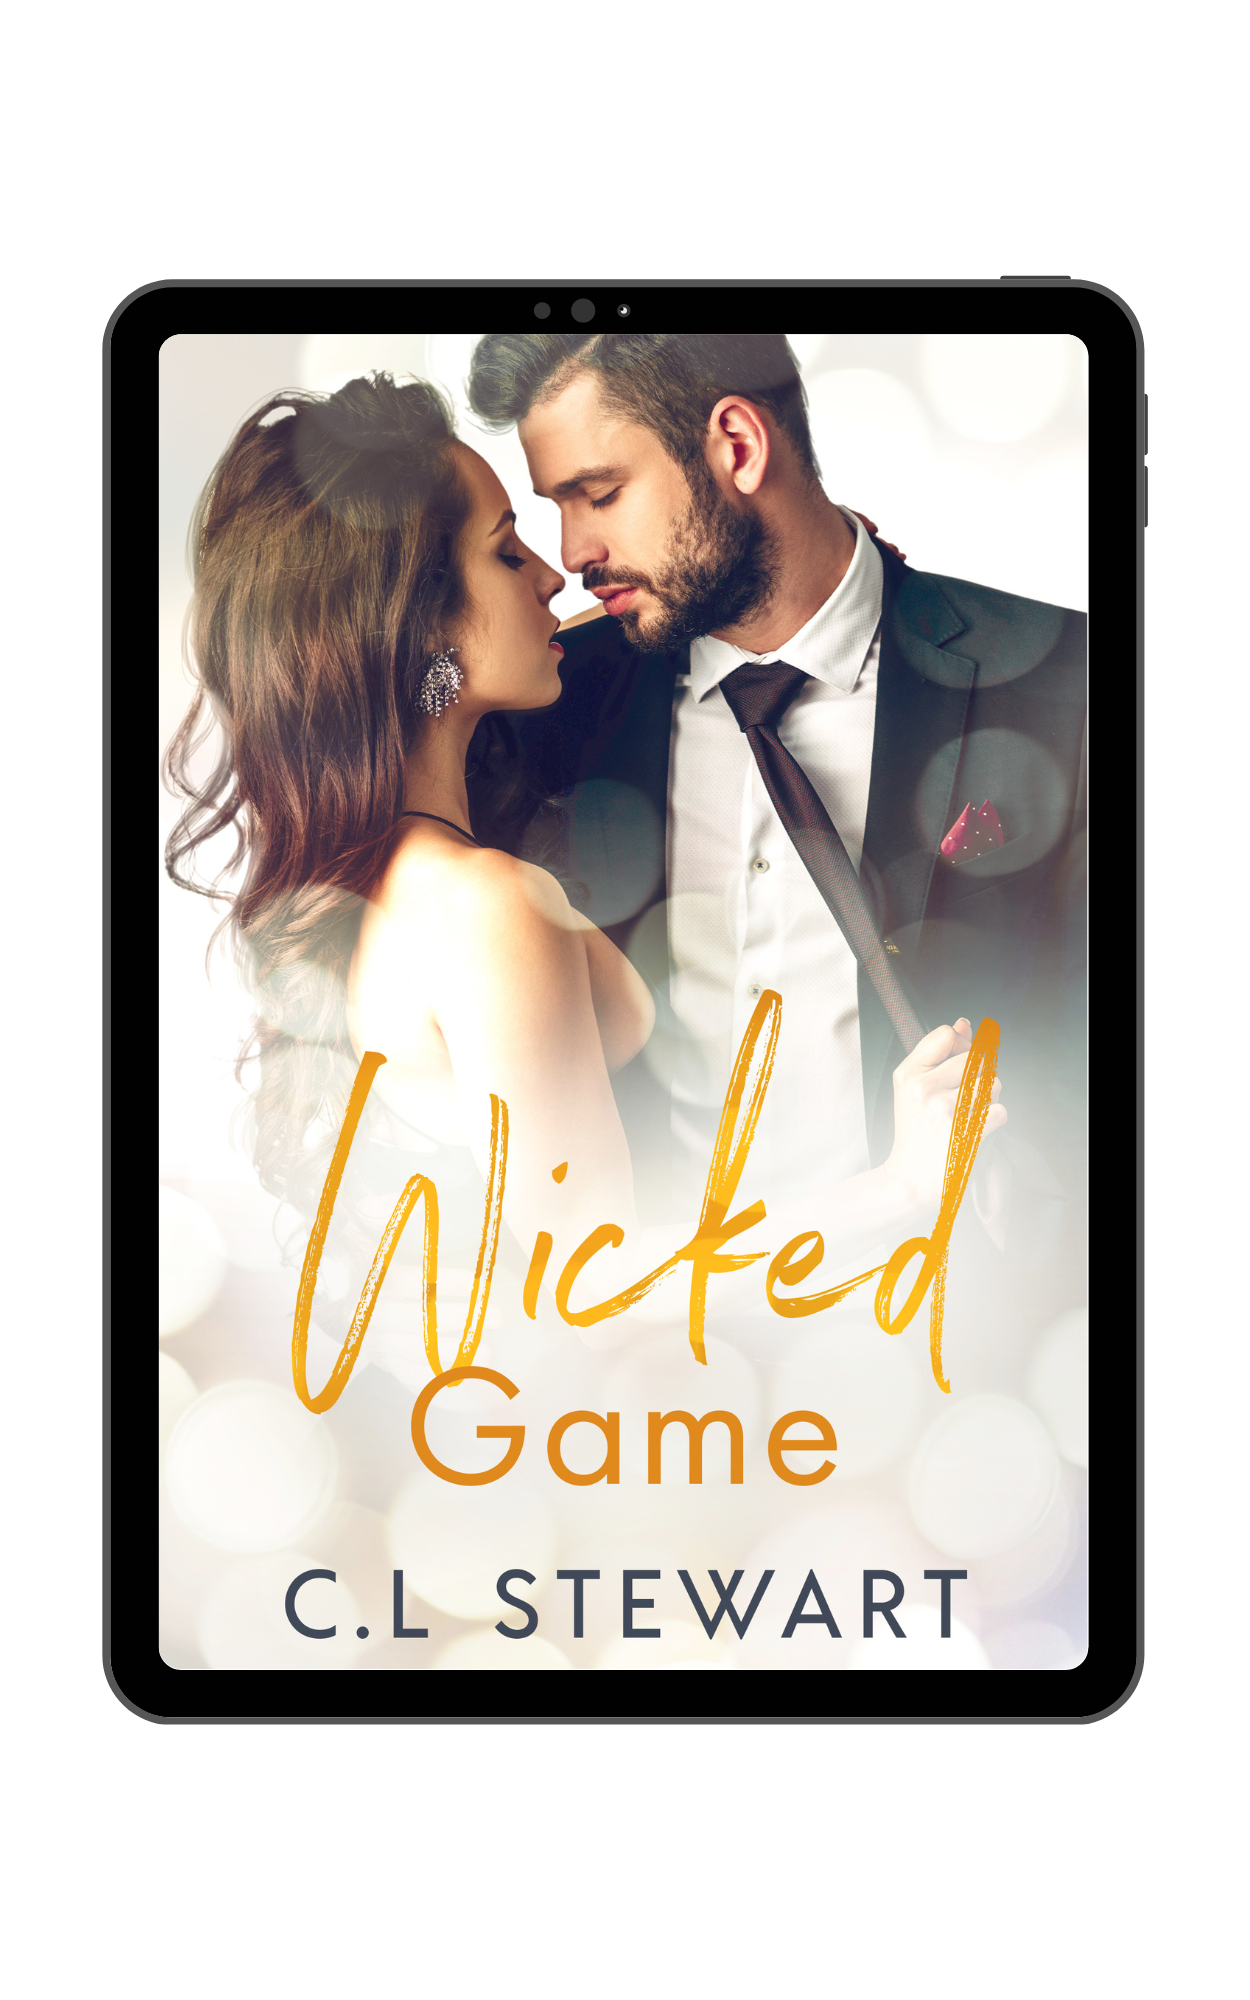 Game Series Book 4 - Wicked Game